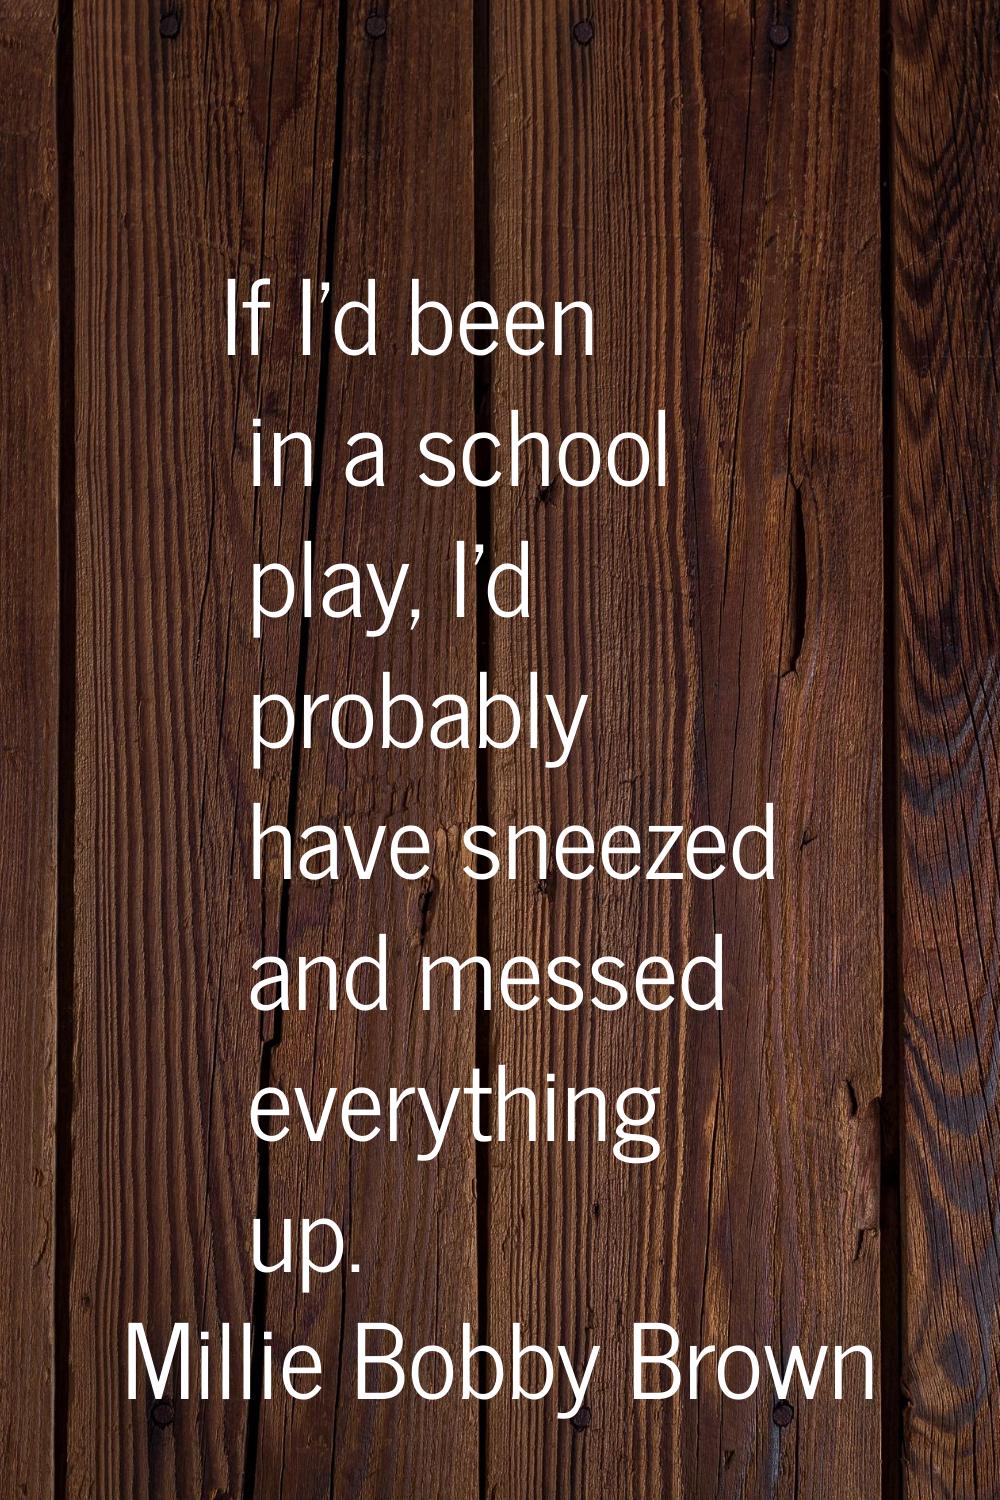 If I'd been in a school play, I'd probably have sneezed and messed everything up.